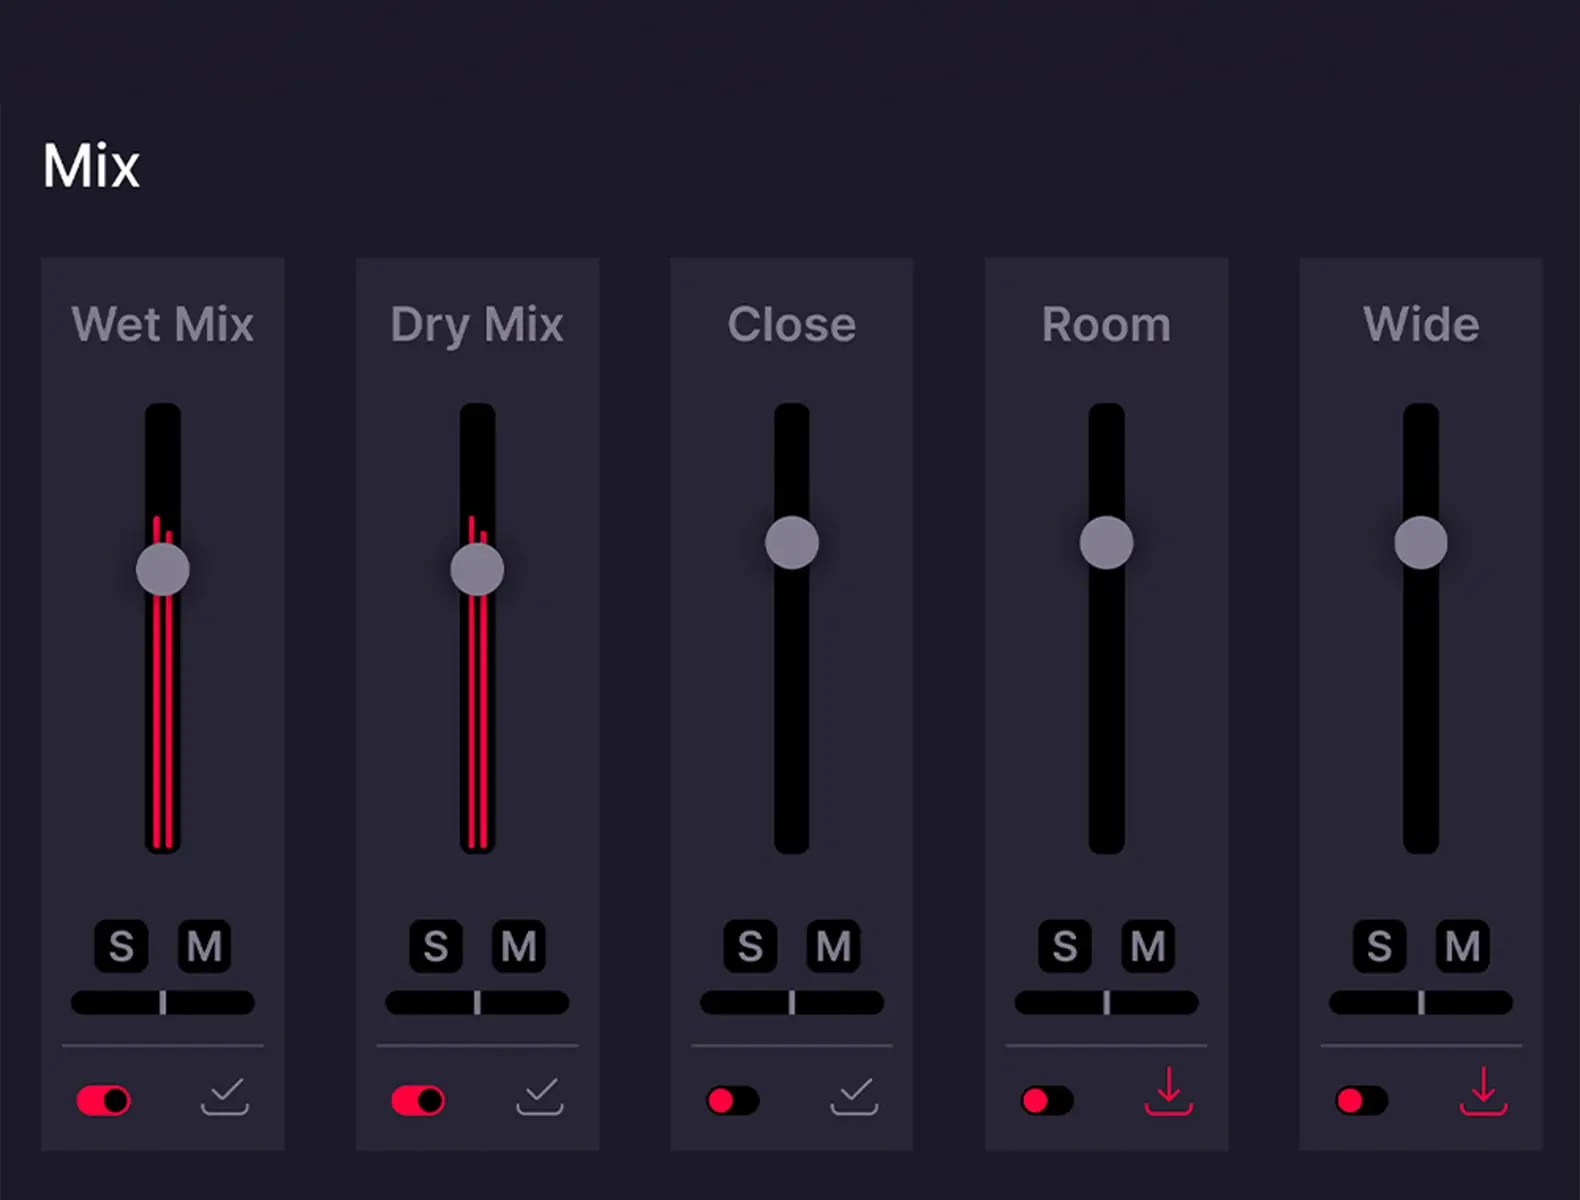 Coming soon to Musio - Advanced mixing controls